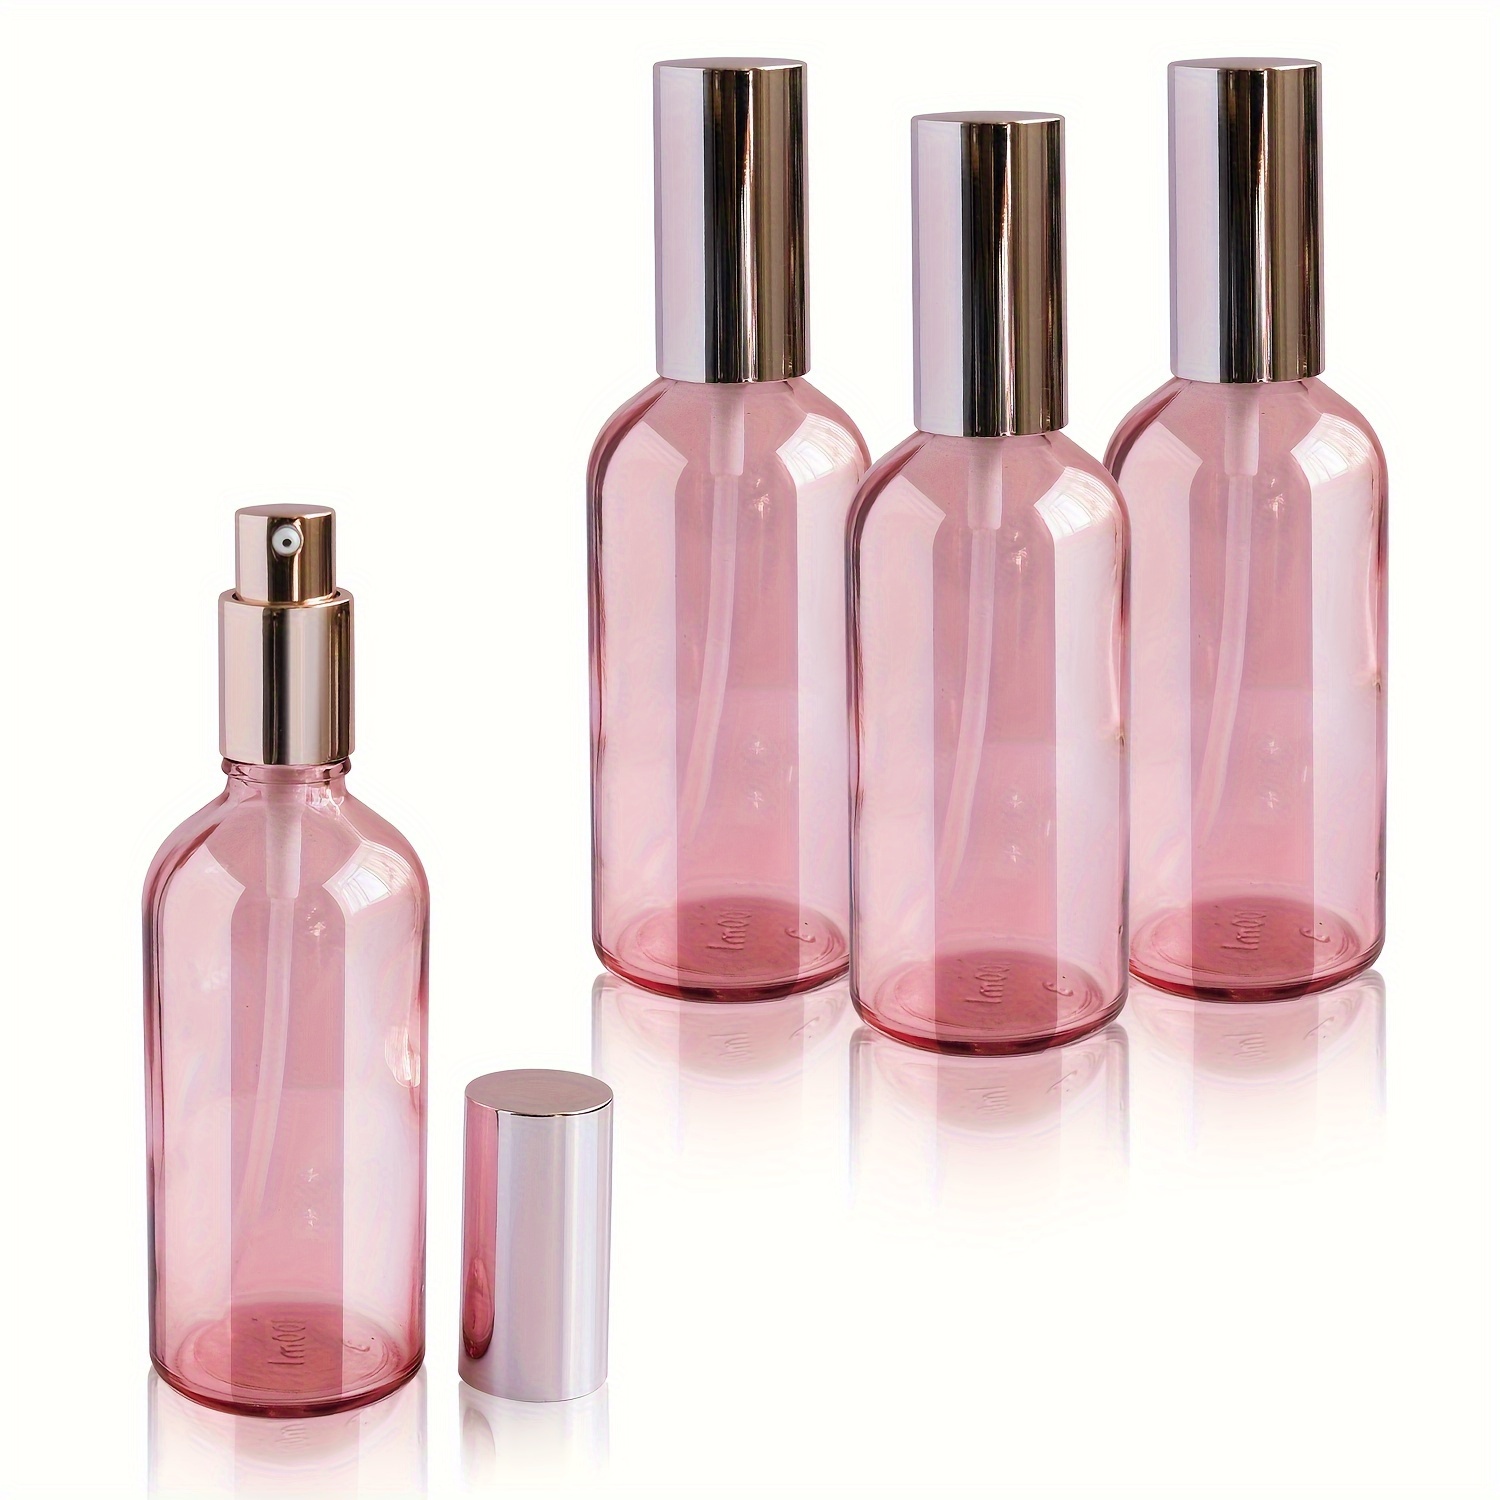 

4pcs, Pink Spray Bottle, 4oz Fine Mist Glass Spray Bottle, Little Refillable Liquid Containers For Watering Flowers Cleaning Perfume